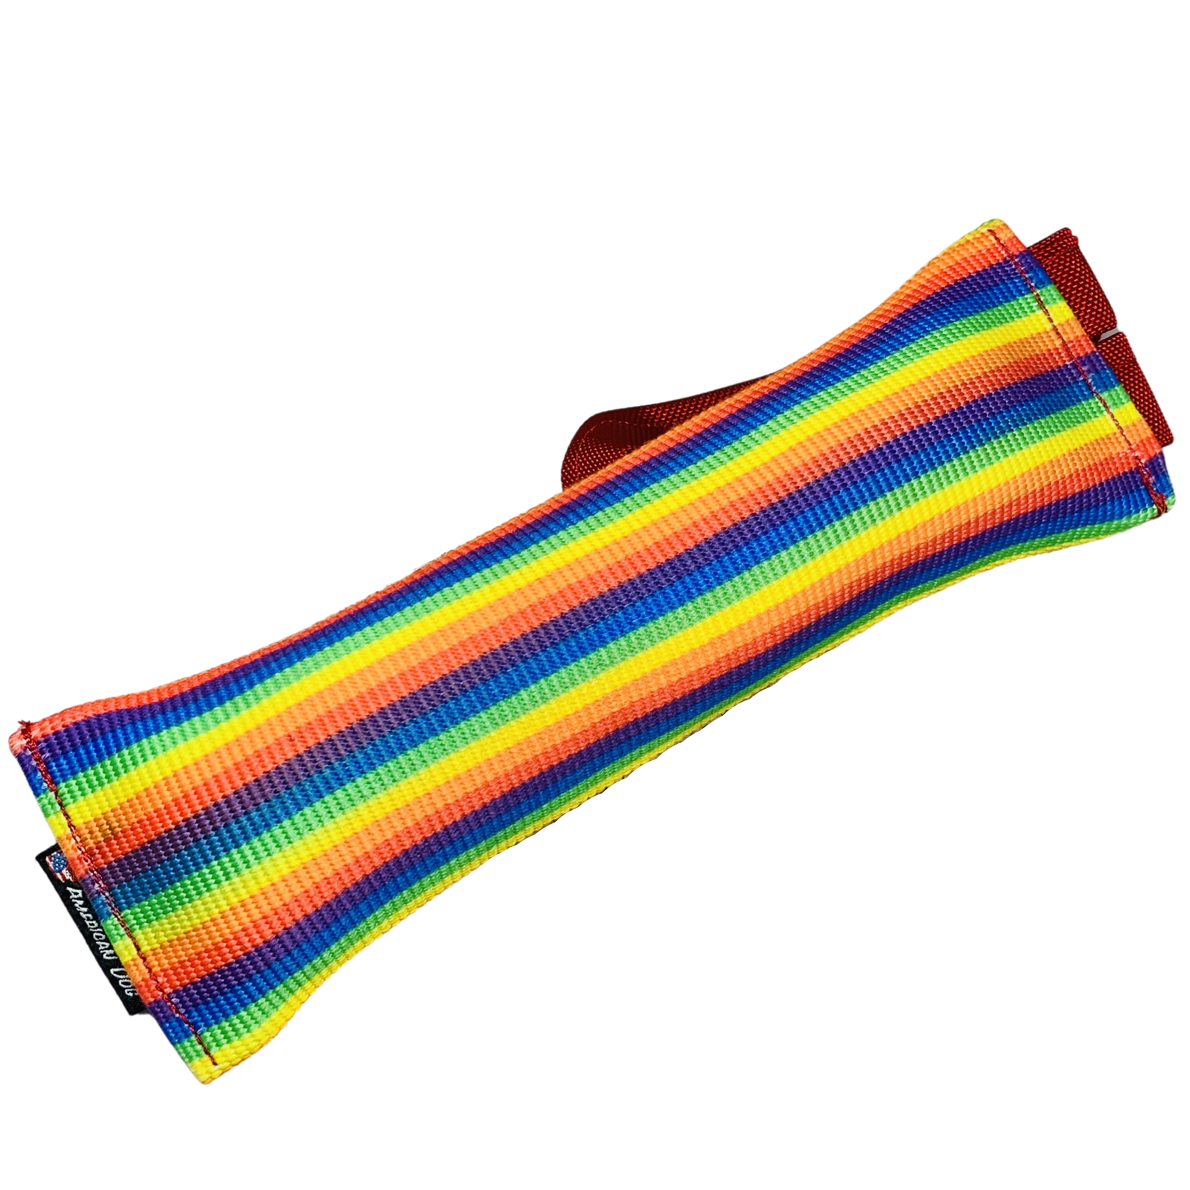 Rainbow Firehose Tug Toy from Rover Pet Products